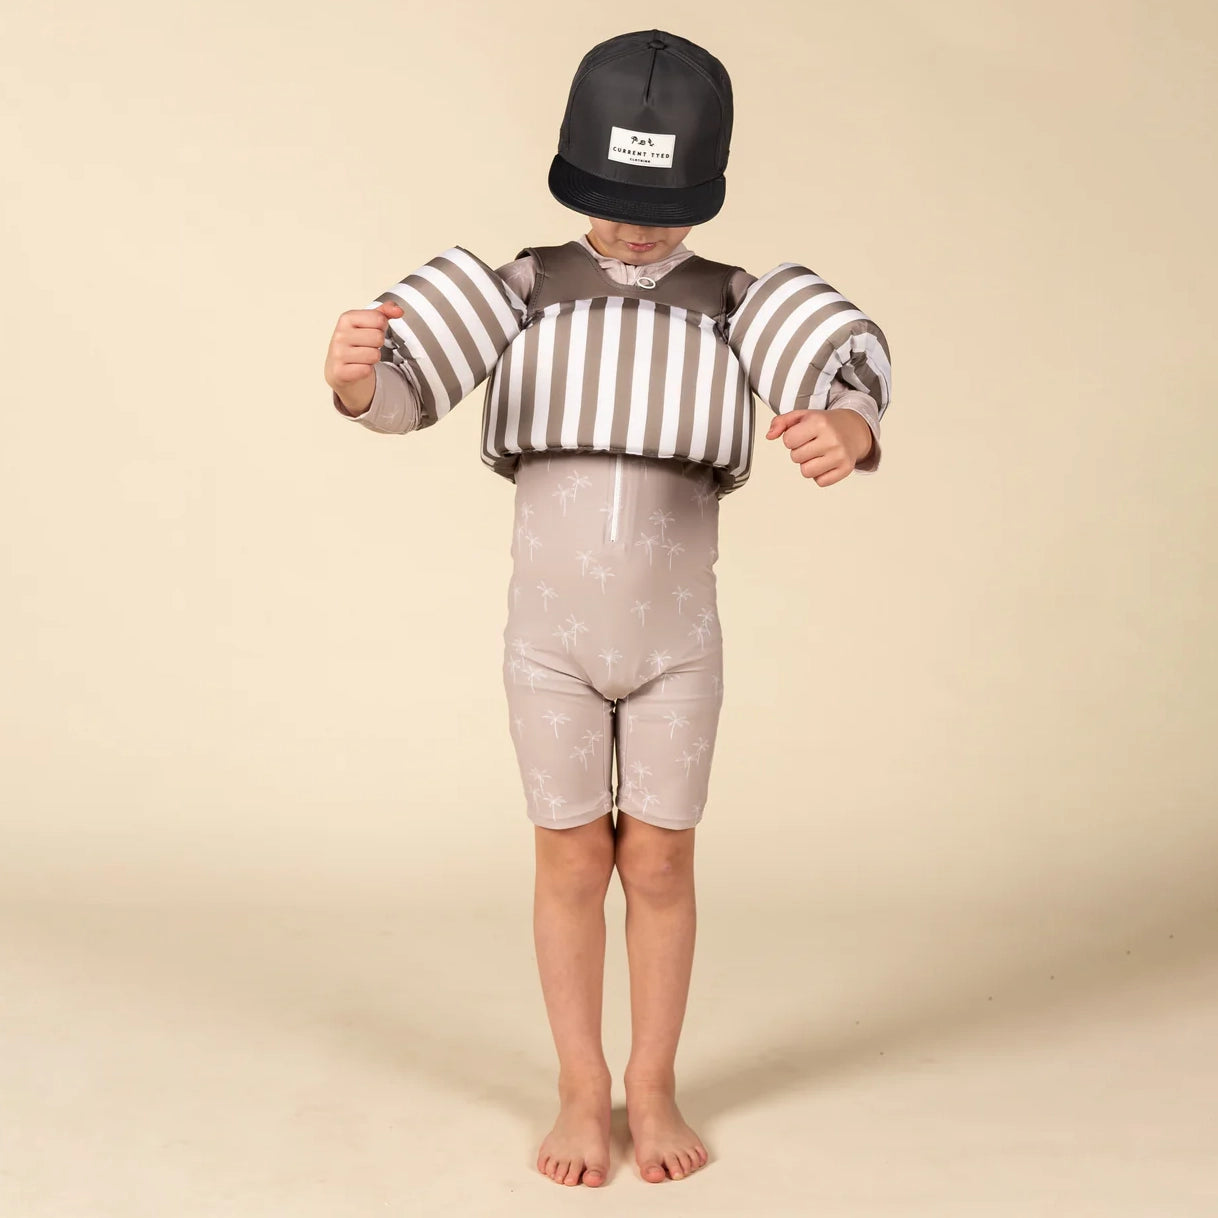 Boy wearing Current Tyed Clothing "Sea" You on Top - Swim Floaties - Brown Stripes